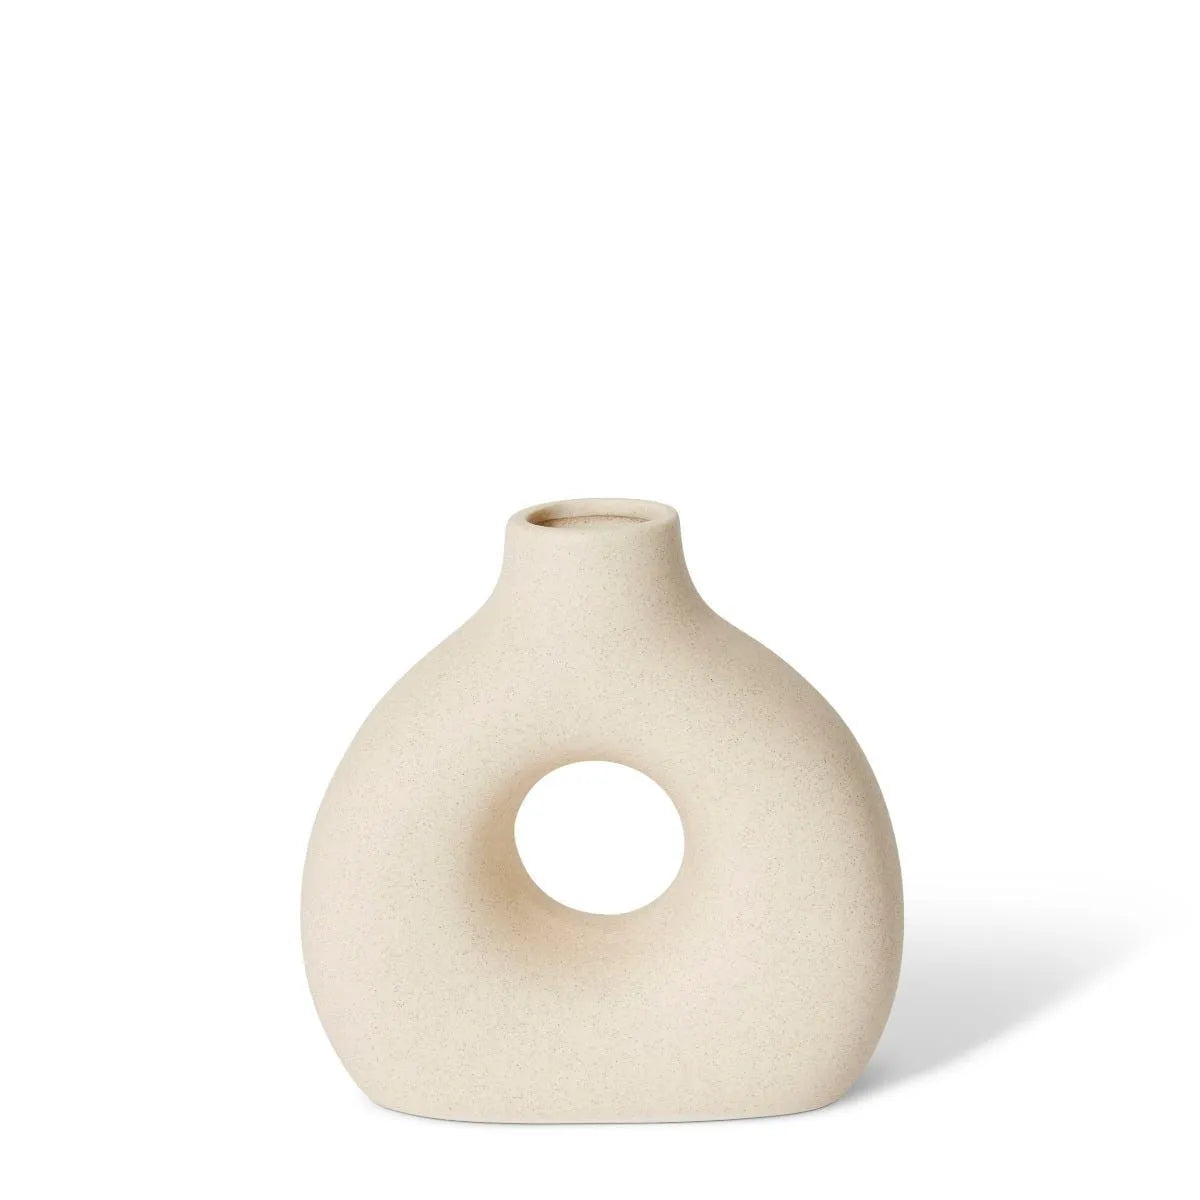 Add a modern touch to your home decor with the Adalynn Vase. This ceramic vase offers a charming display with its interesting feature. An elegant addition to any interior.